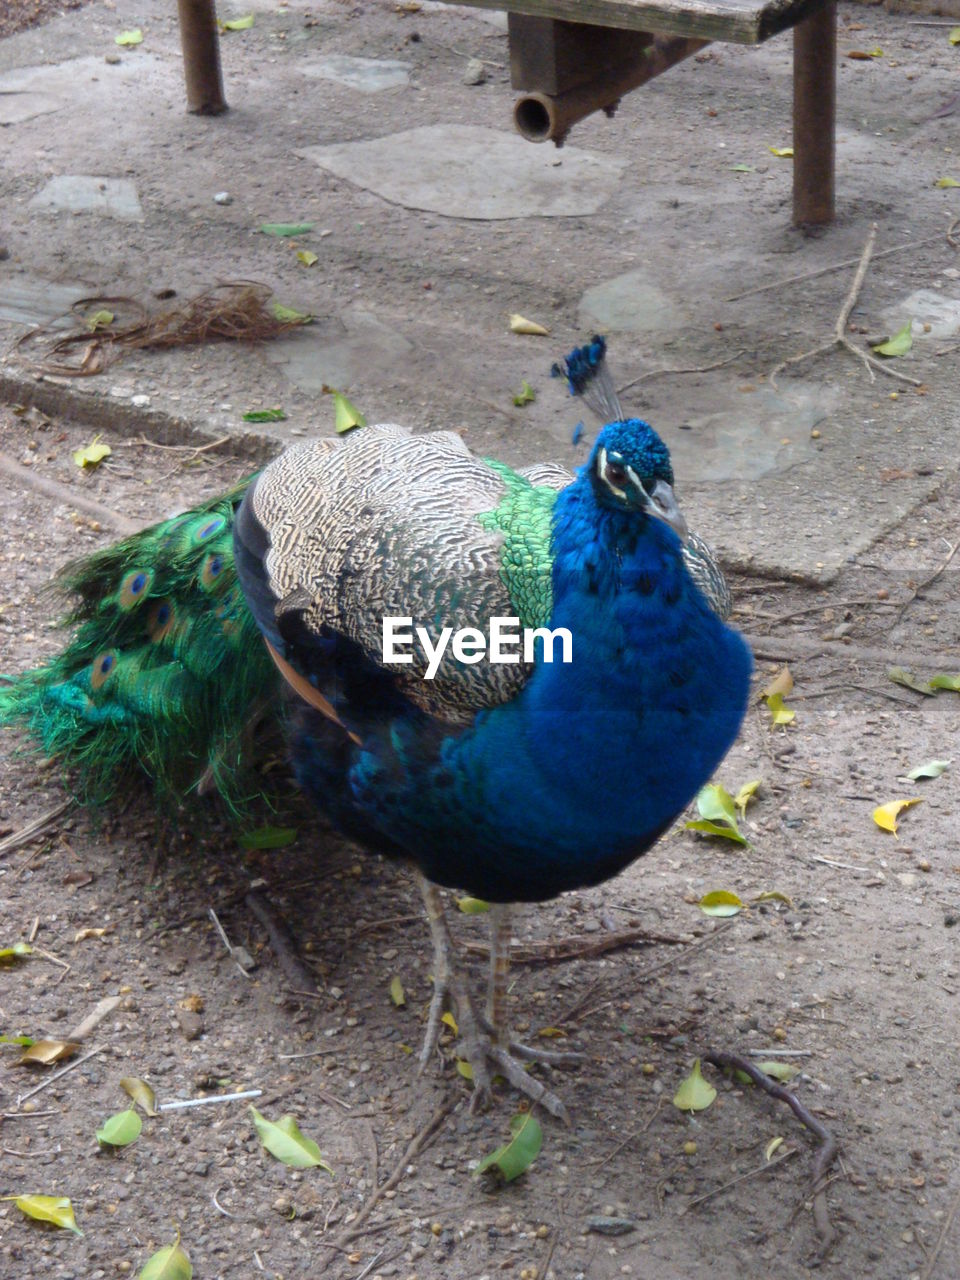 HIGH ANGLE VIEW OF PEACOCK WITH FEATHERS ON THE GROUND